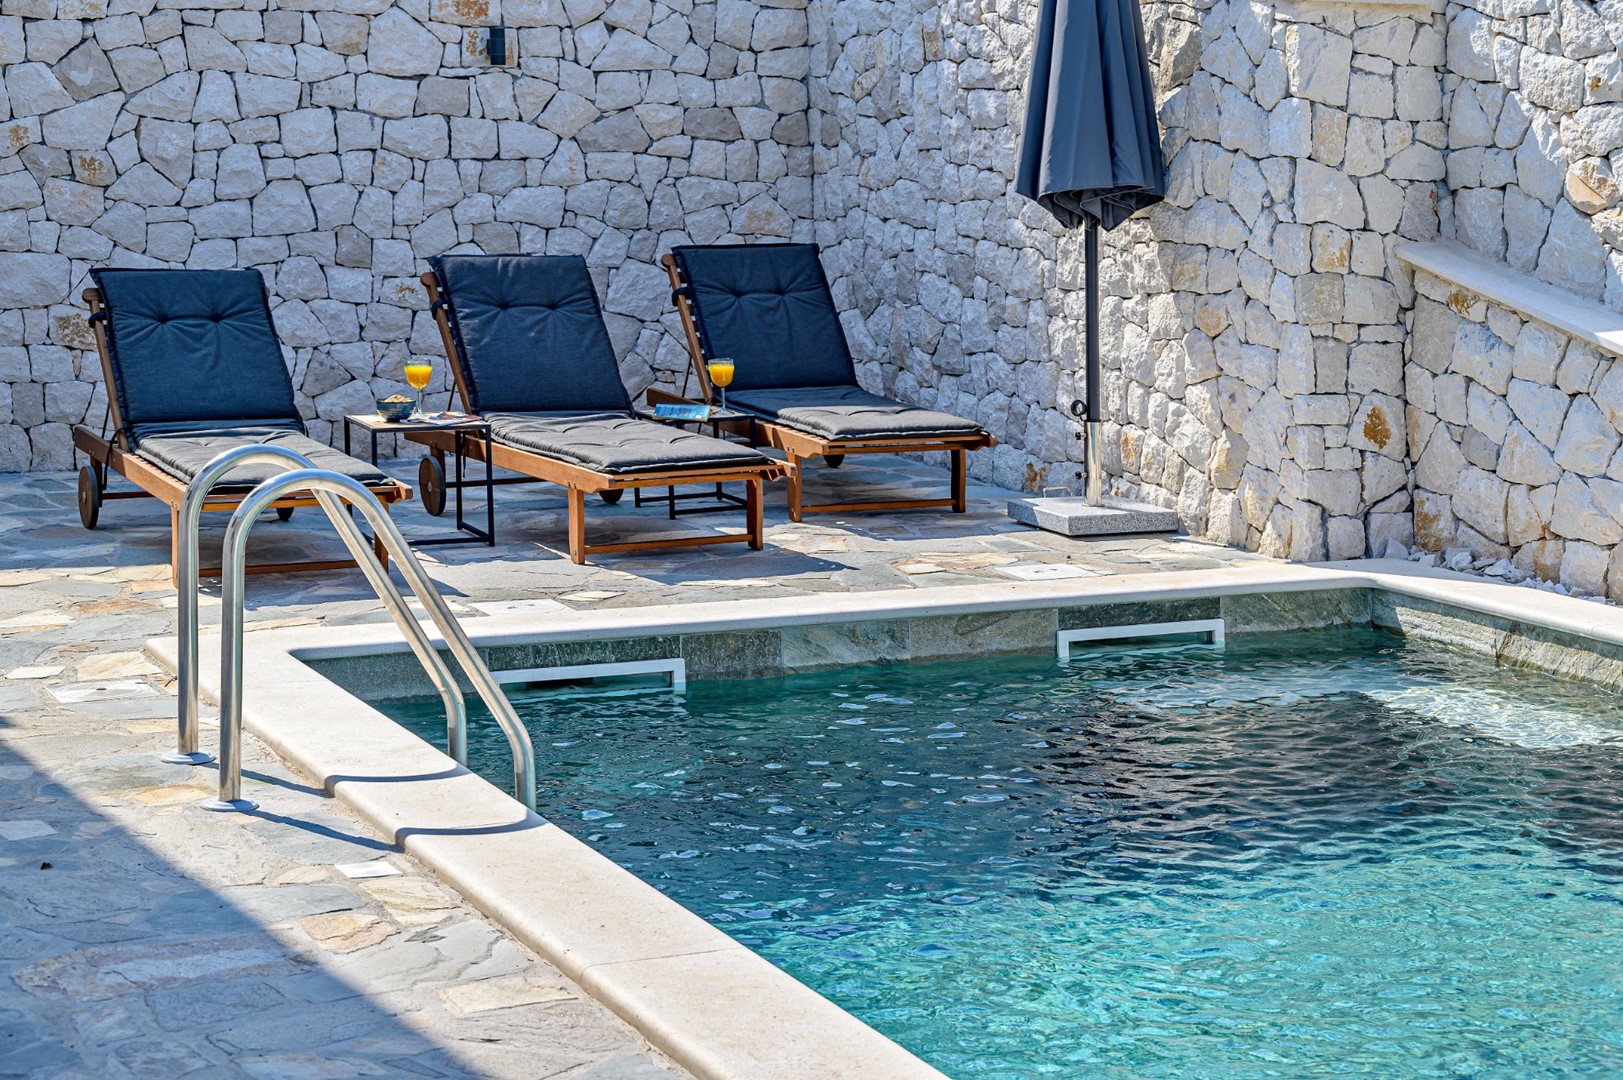 A view of the sun loungers by the pool at the Croatian luxury Dream and Live villa rental property